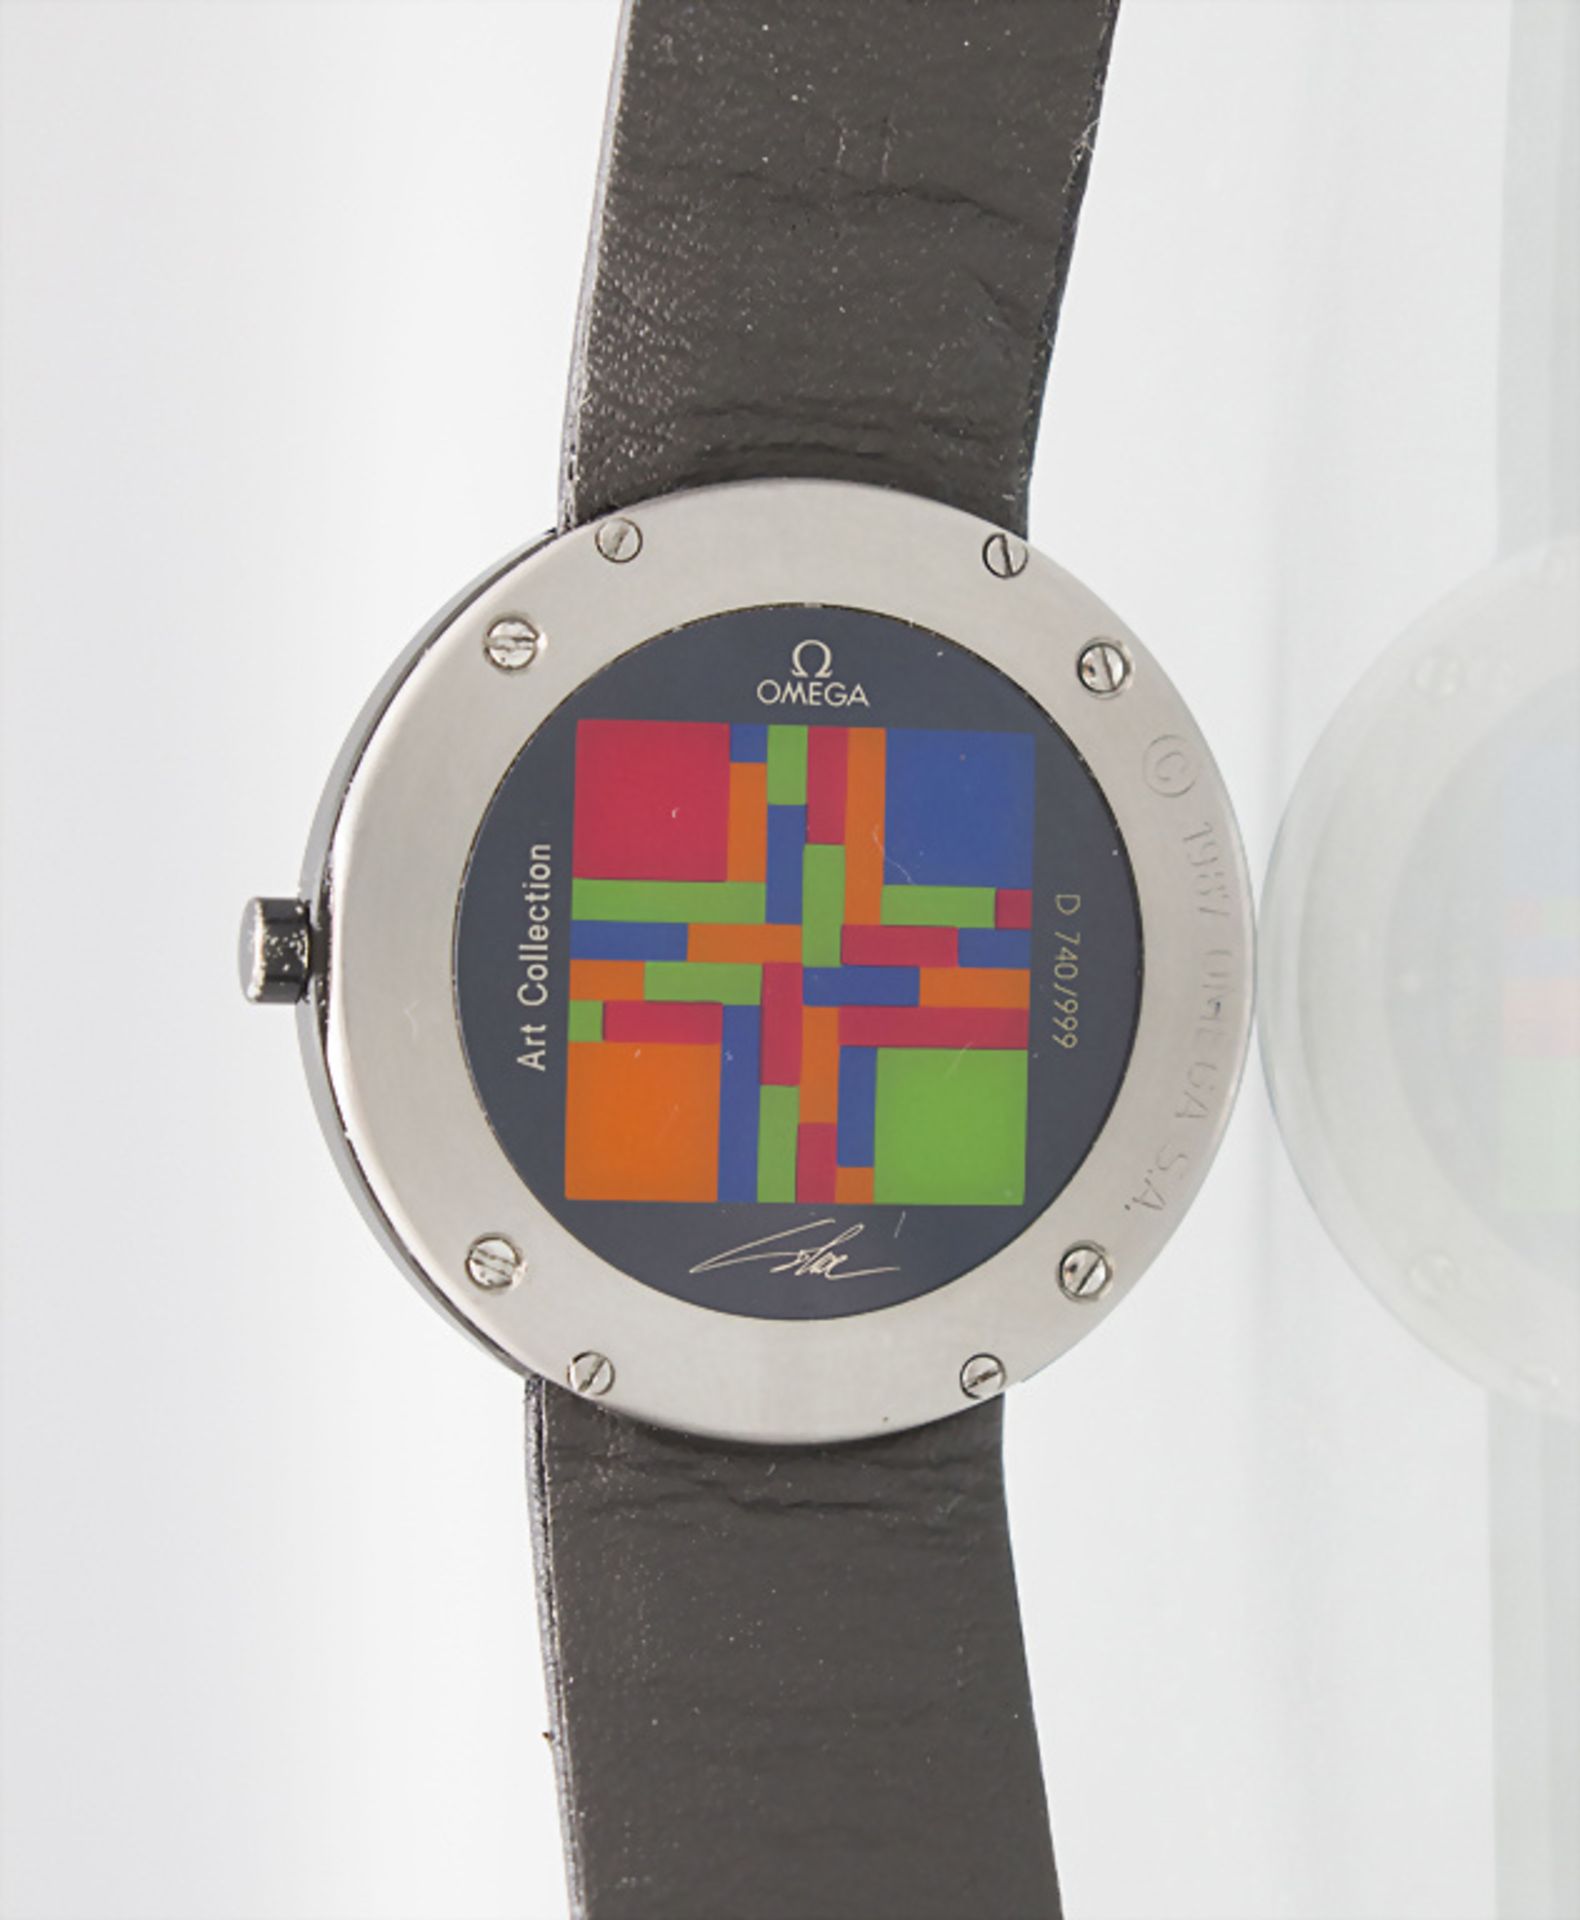 Unisexuhr / A unisex wristwatch, Omega 'Art Collection', 1987 - Image 3 of 3